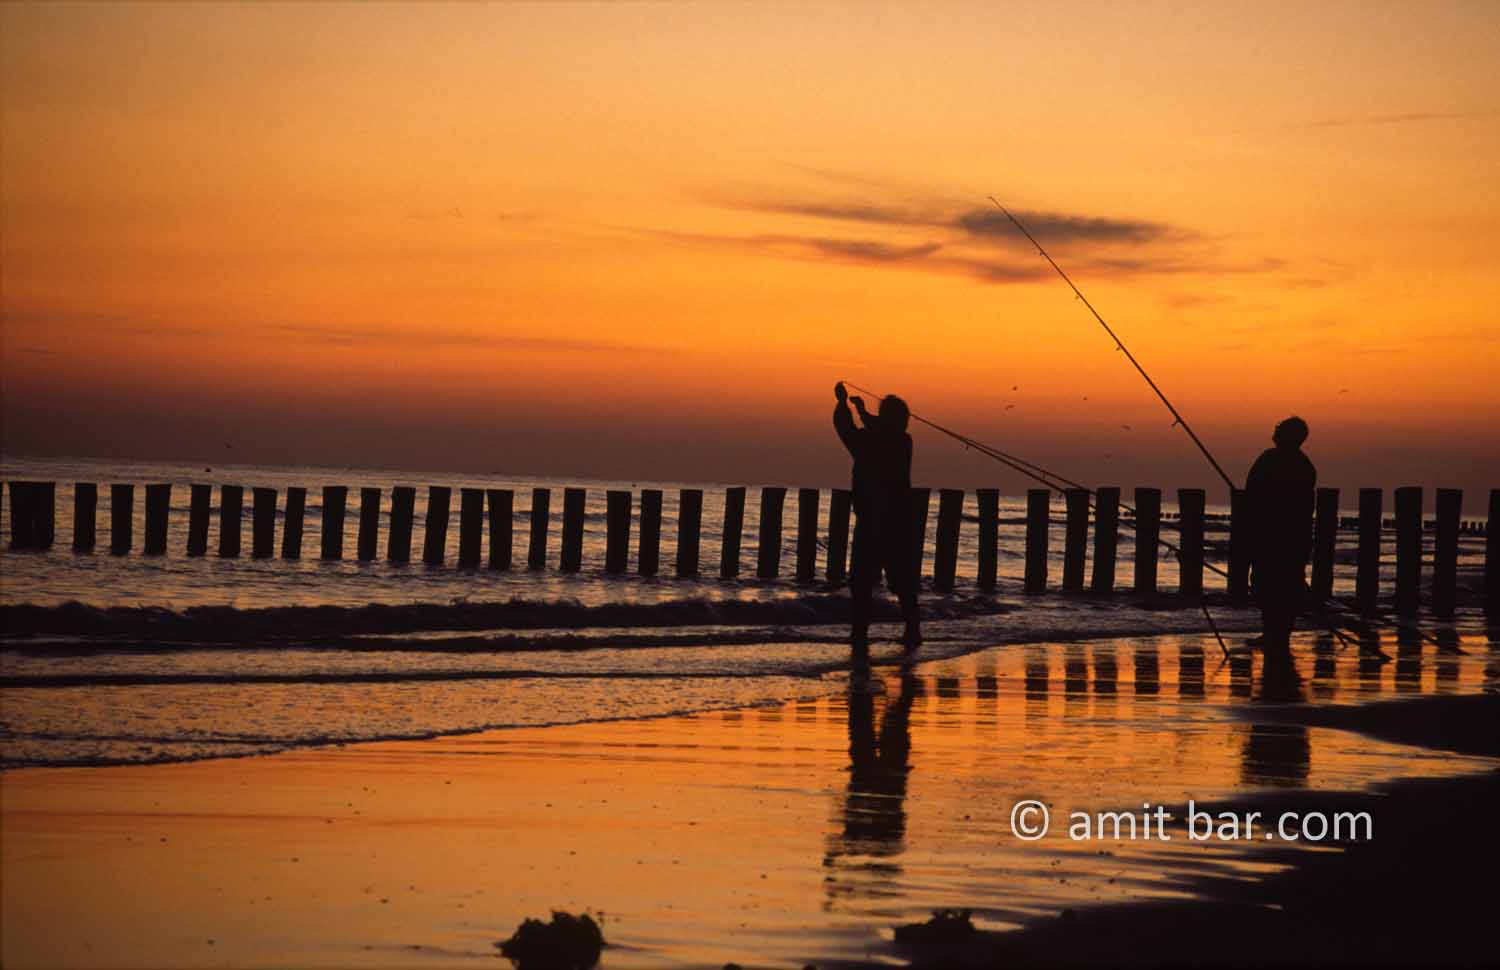 Fishermen at sunset: Fishermen are trying their last luck on the shore in The Netherlands